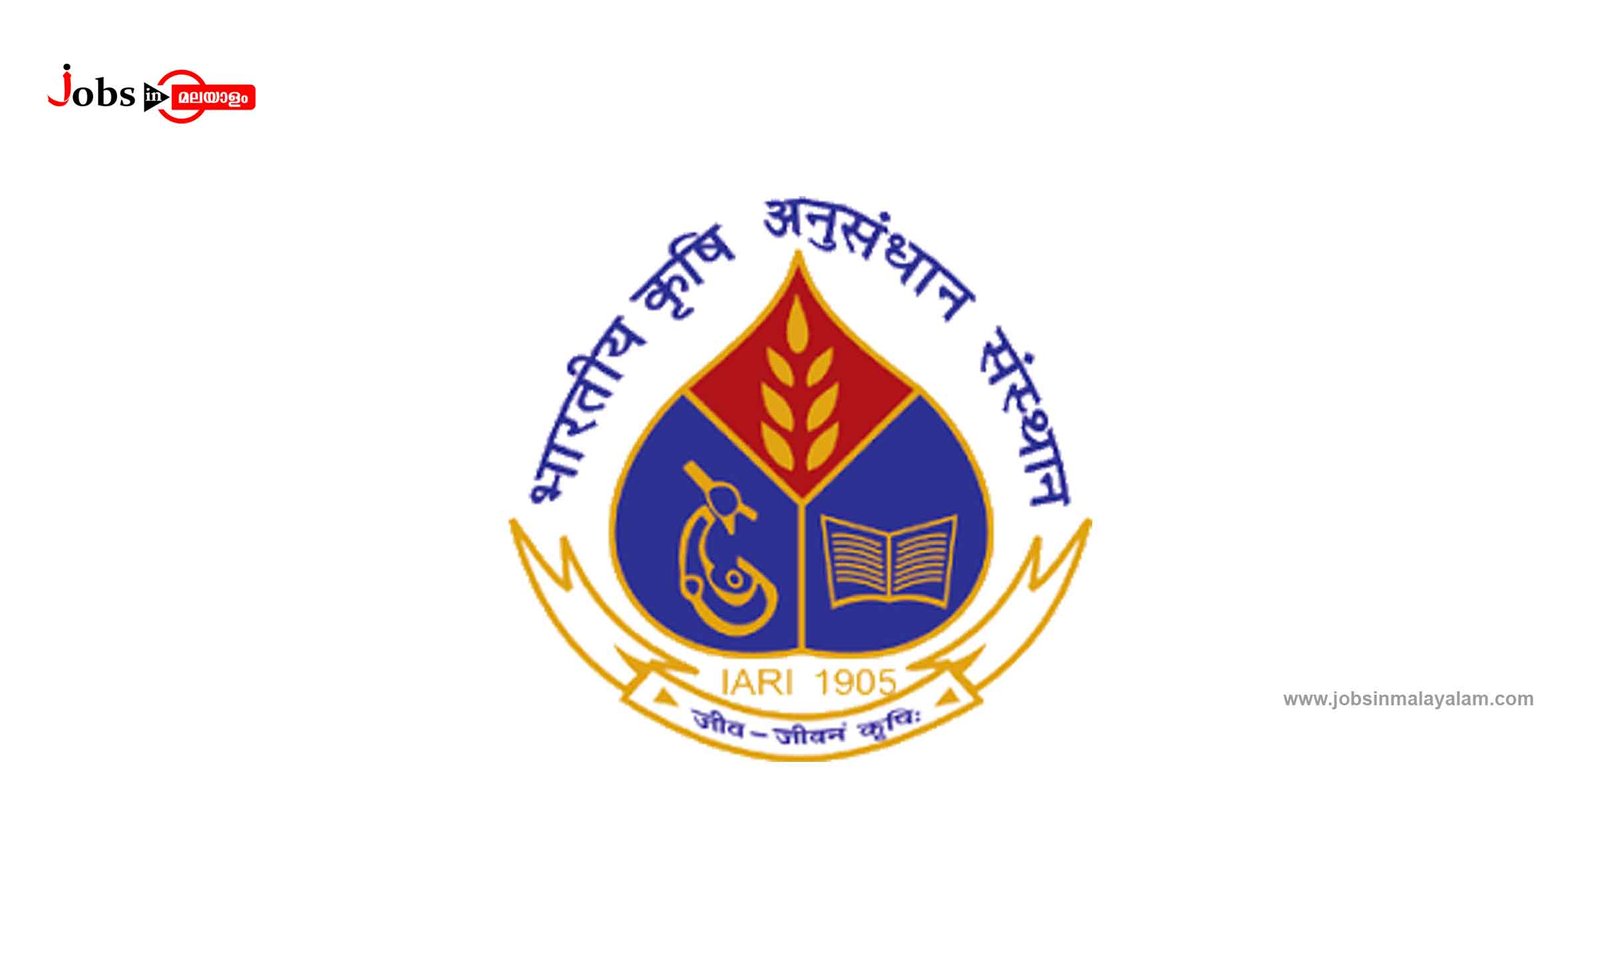 ICAR - Indian Agricultural Research Institute Logo